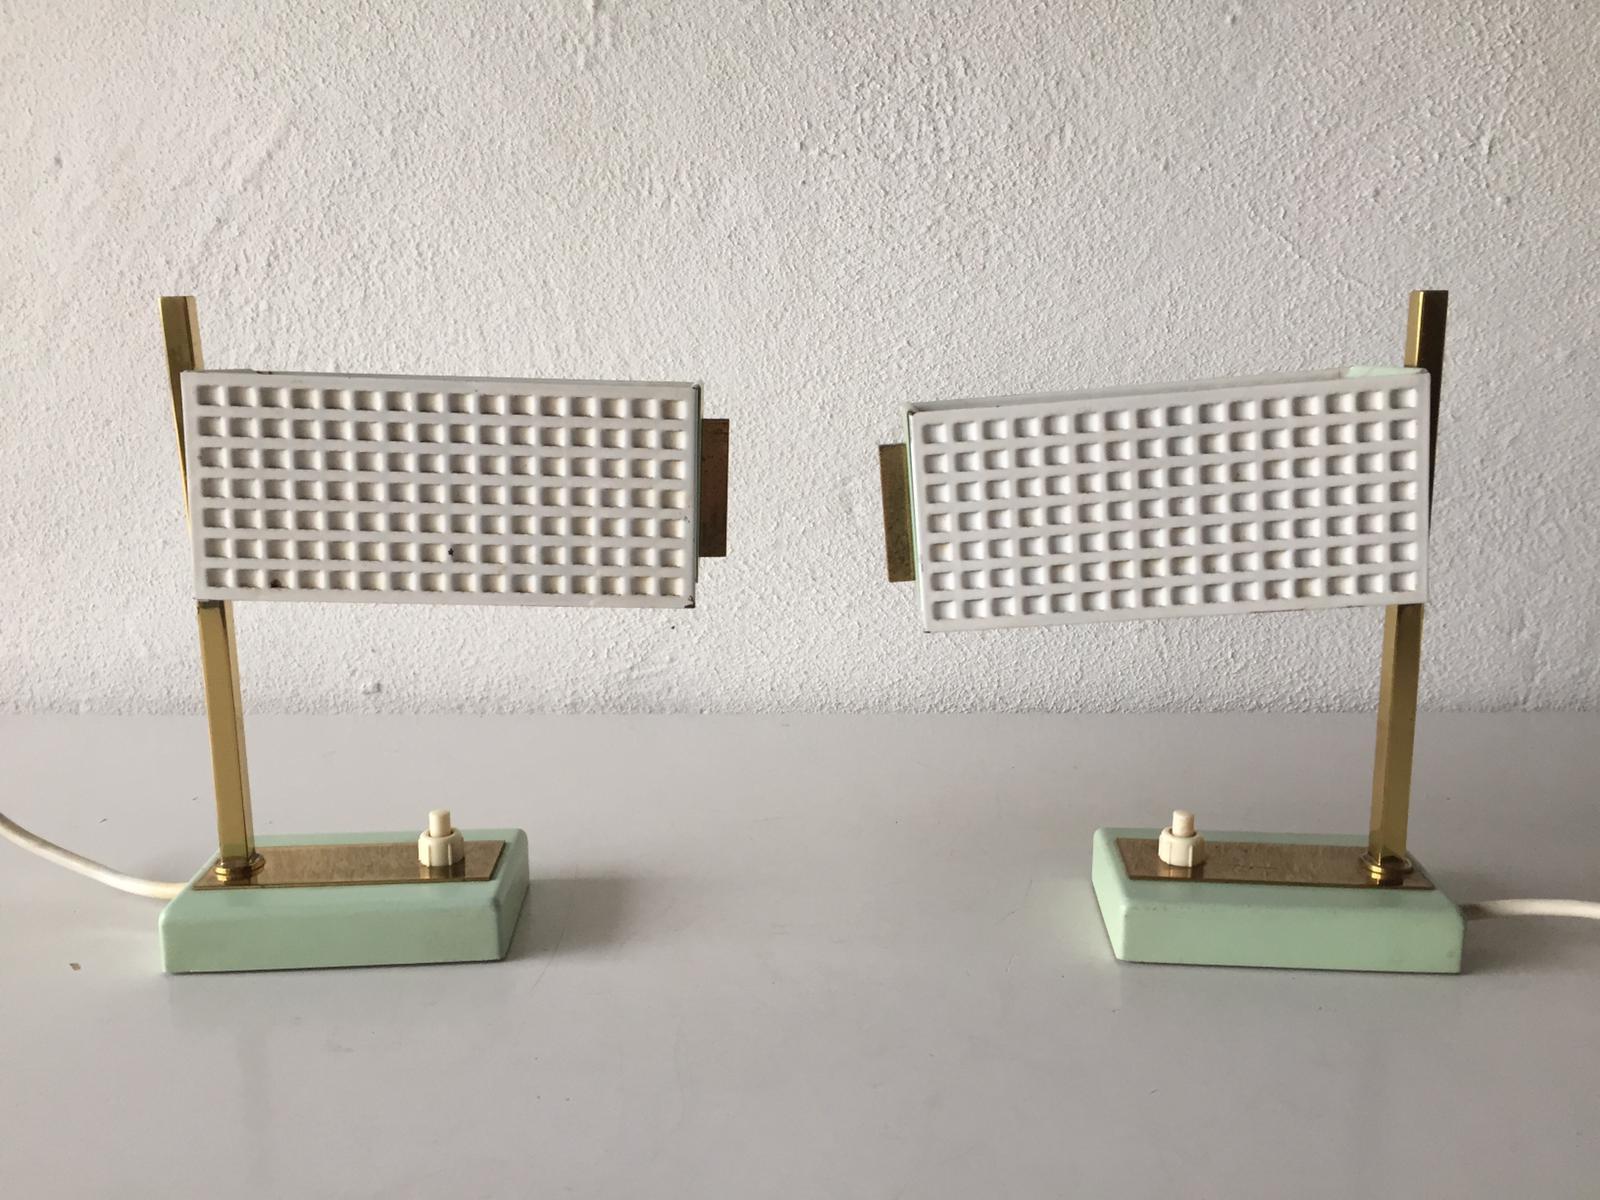 Green and white metal pair of table lamps style of Mathieu Matégot, 1950s

Minimal and very high quality design
Fully functional.

These lamps made of perforated metal and brass.

Original cable and plug. These lamps are suitable for EU plug socket.